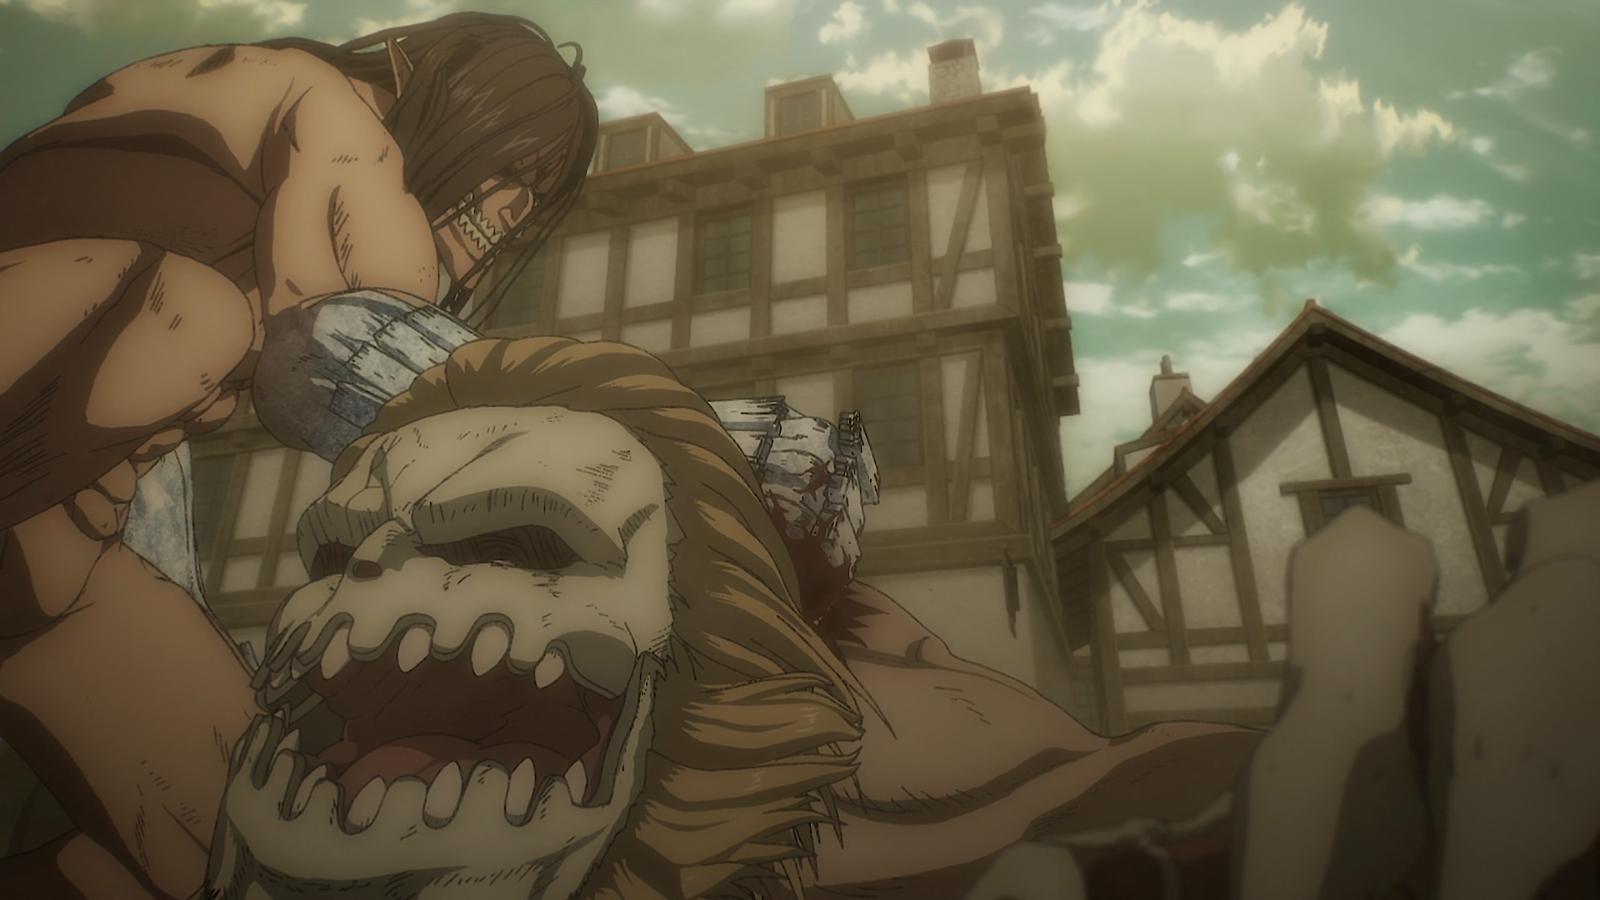 Attack on Titan: Season 4 part 2 episode 3 release time for 'Two Brothers